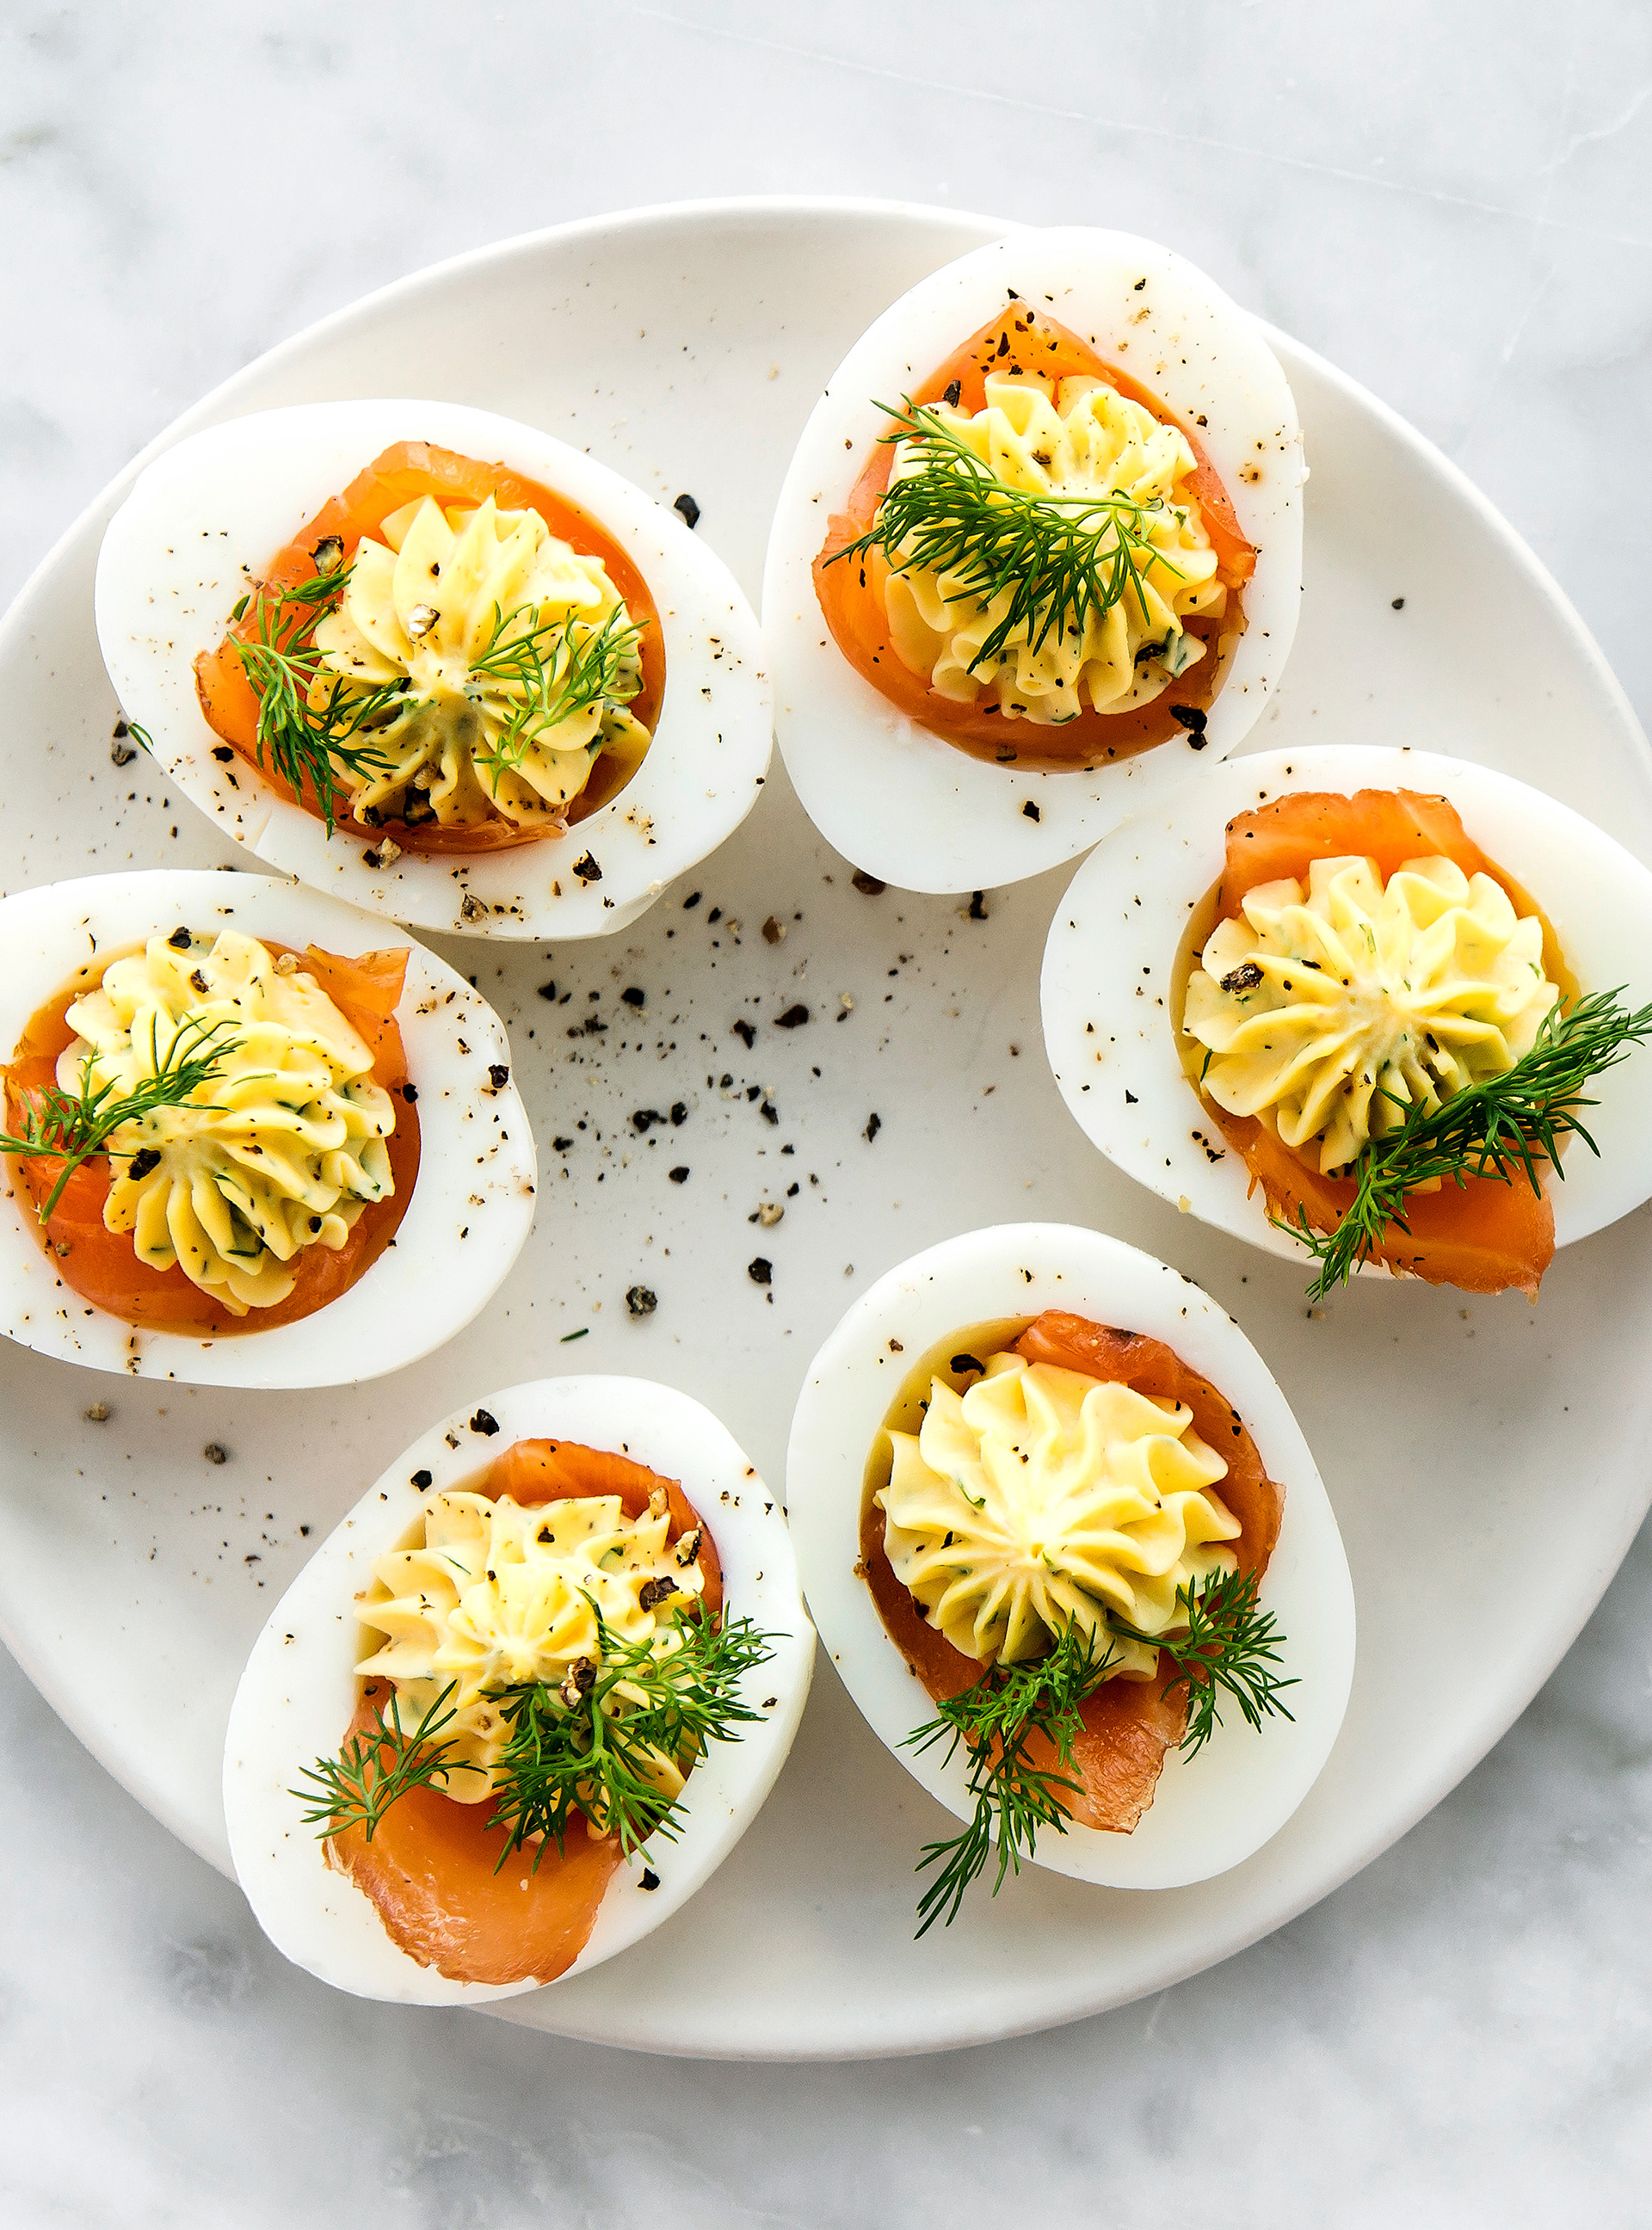 Devilled Eggs with Smoked Salmon